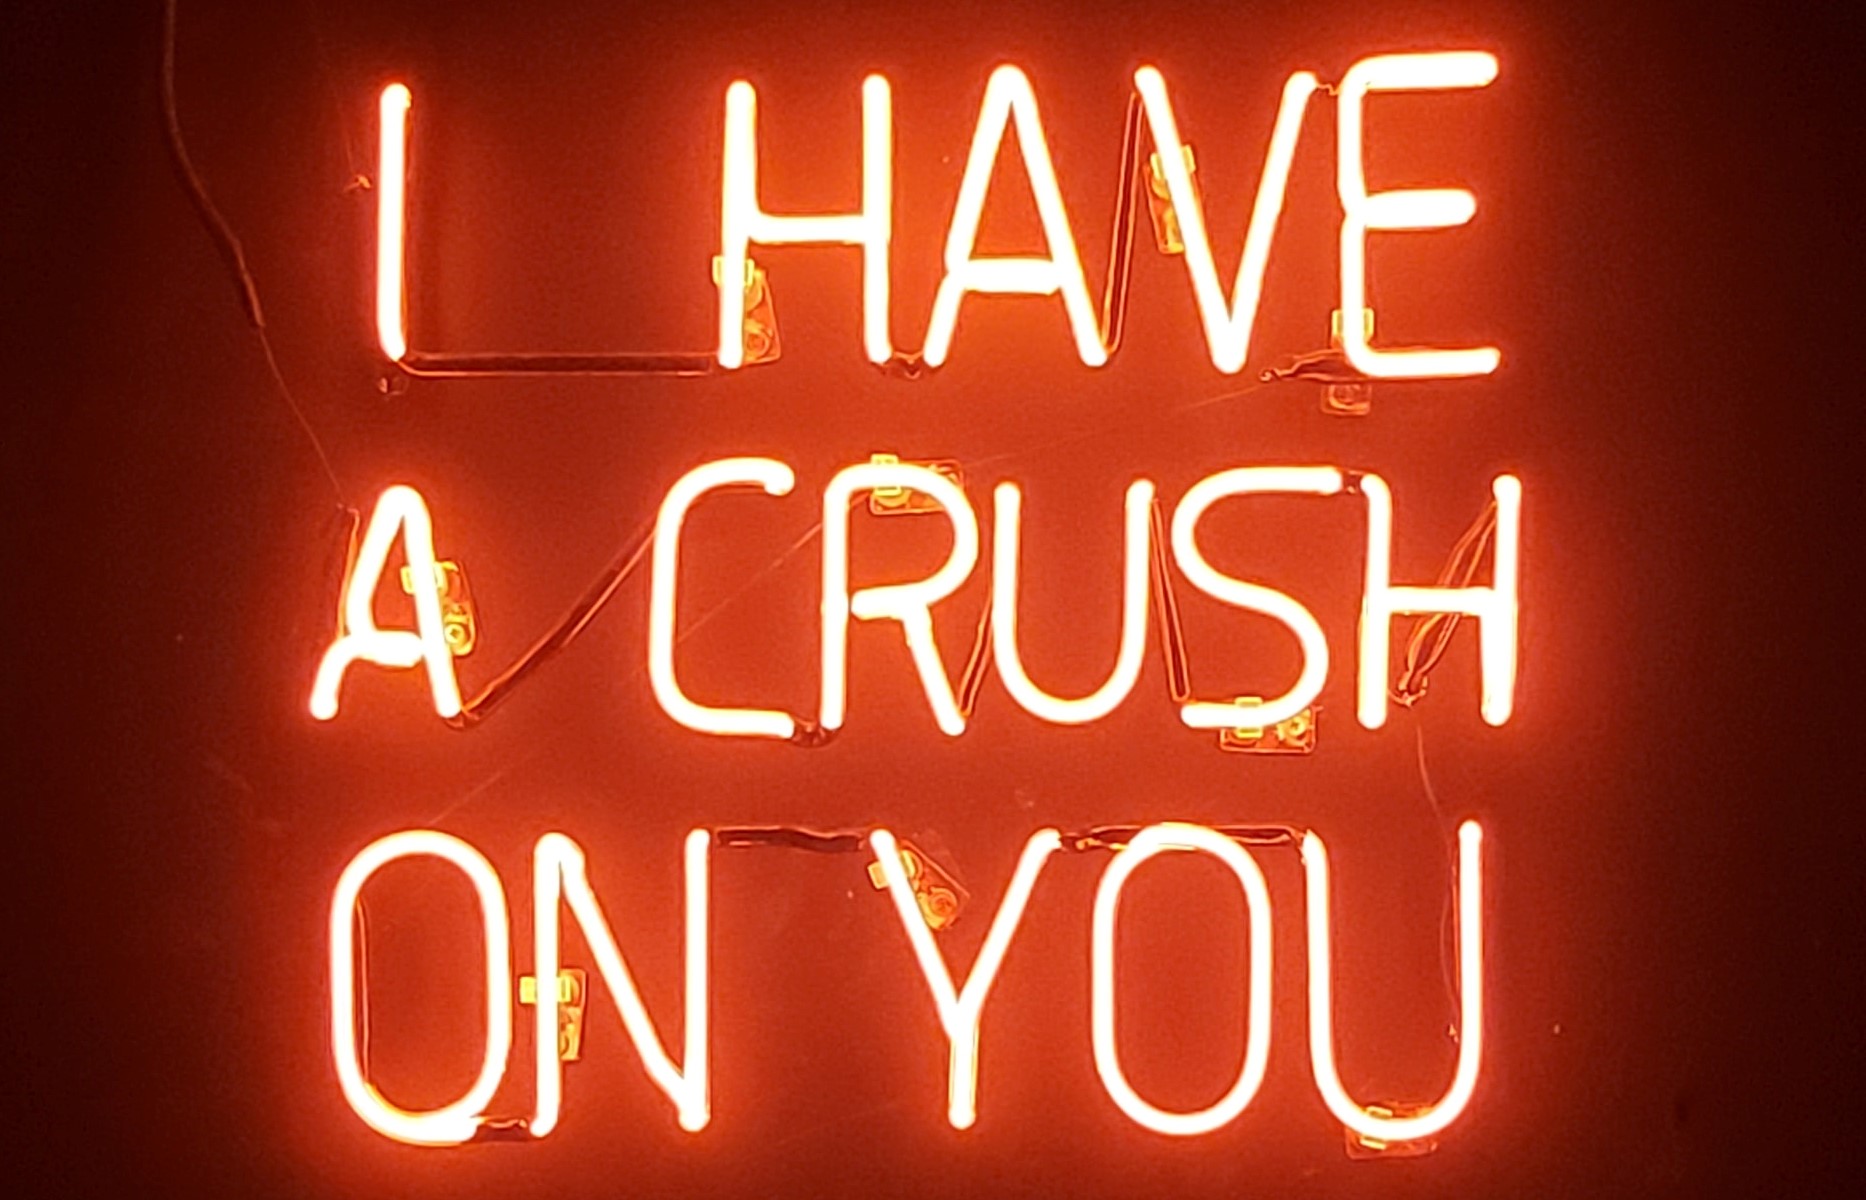 I have a crush on you (one-sided love stories) True Love. Crush image